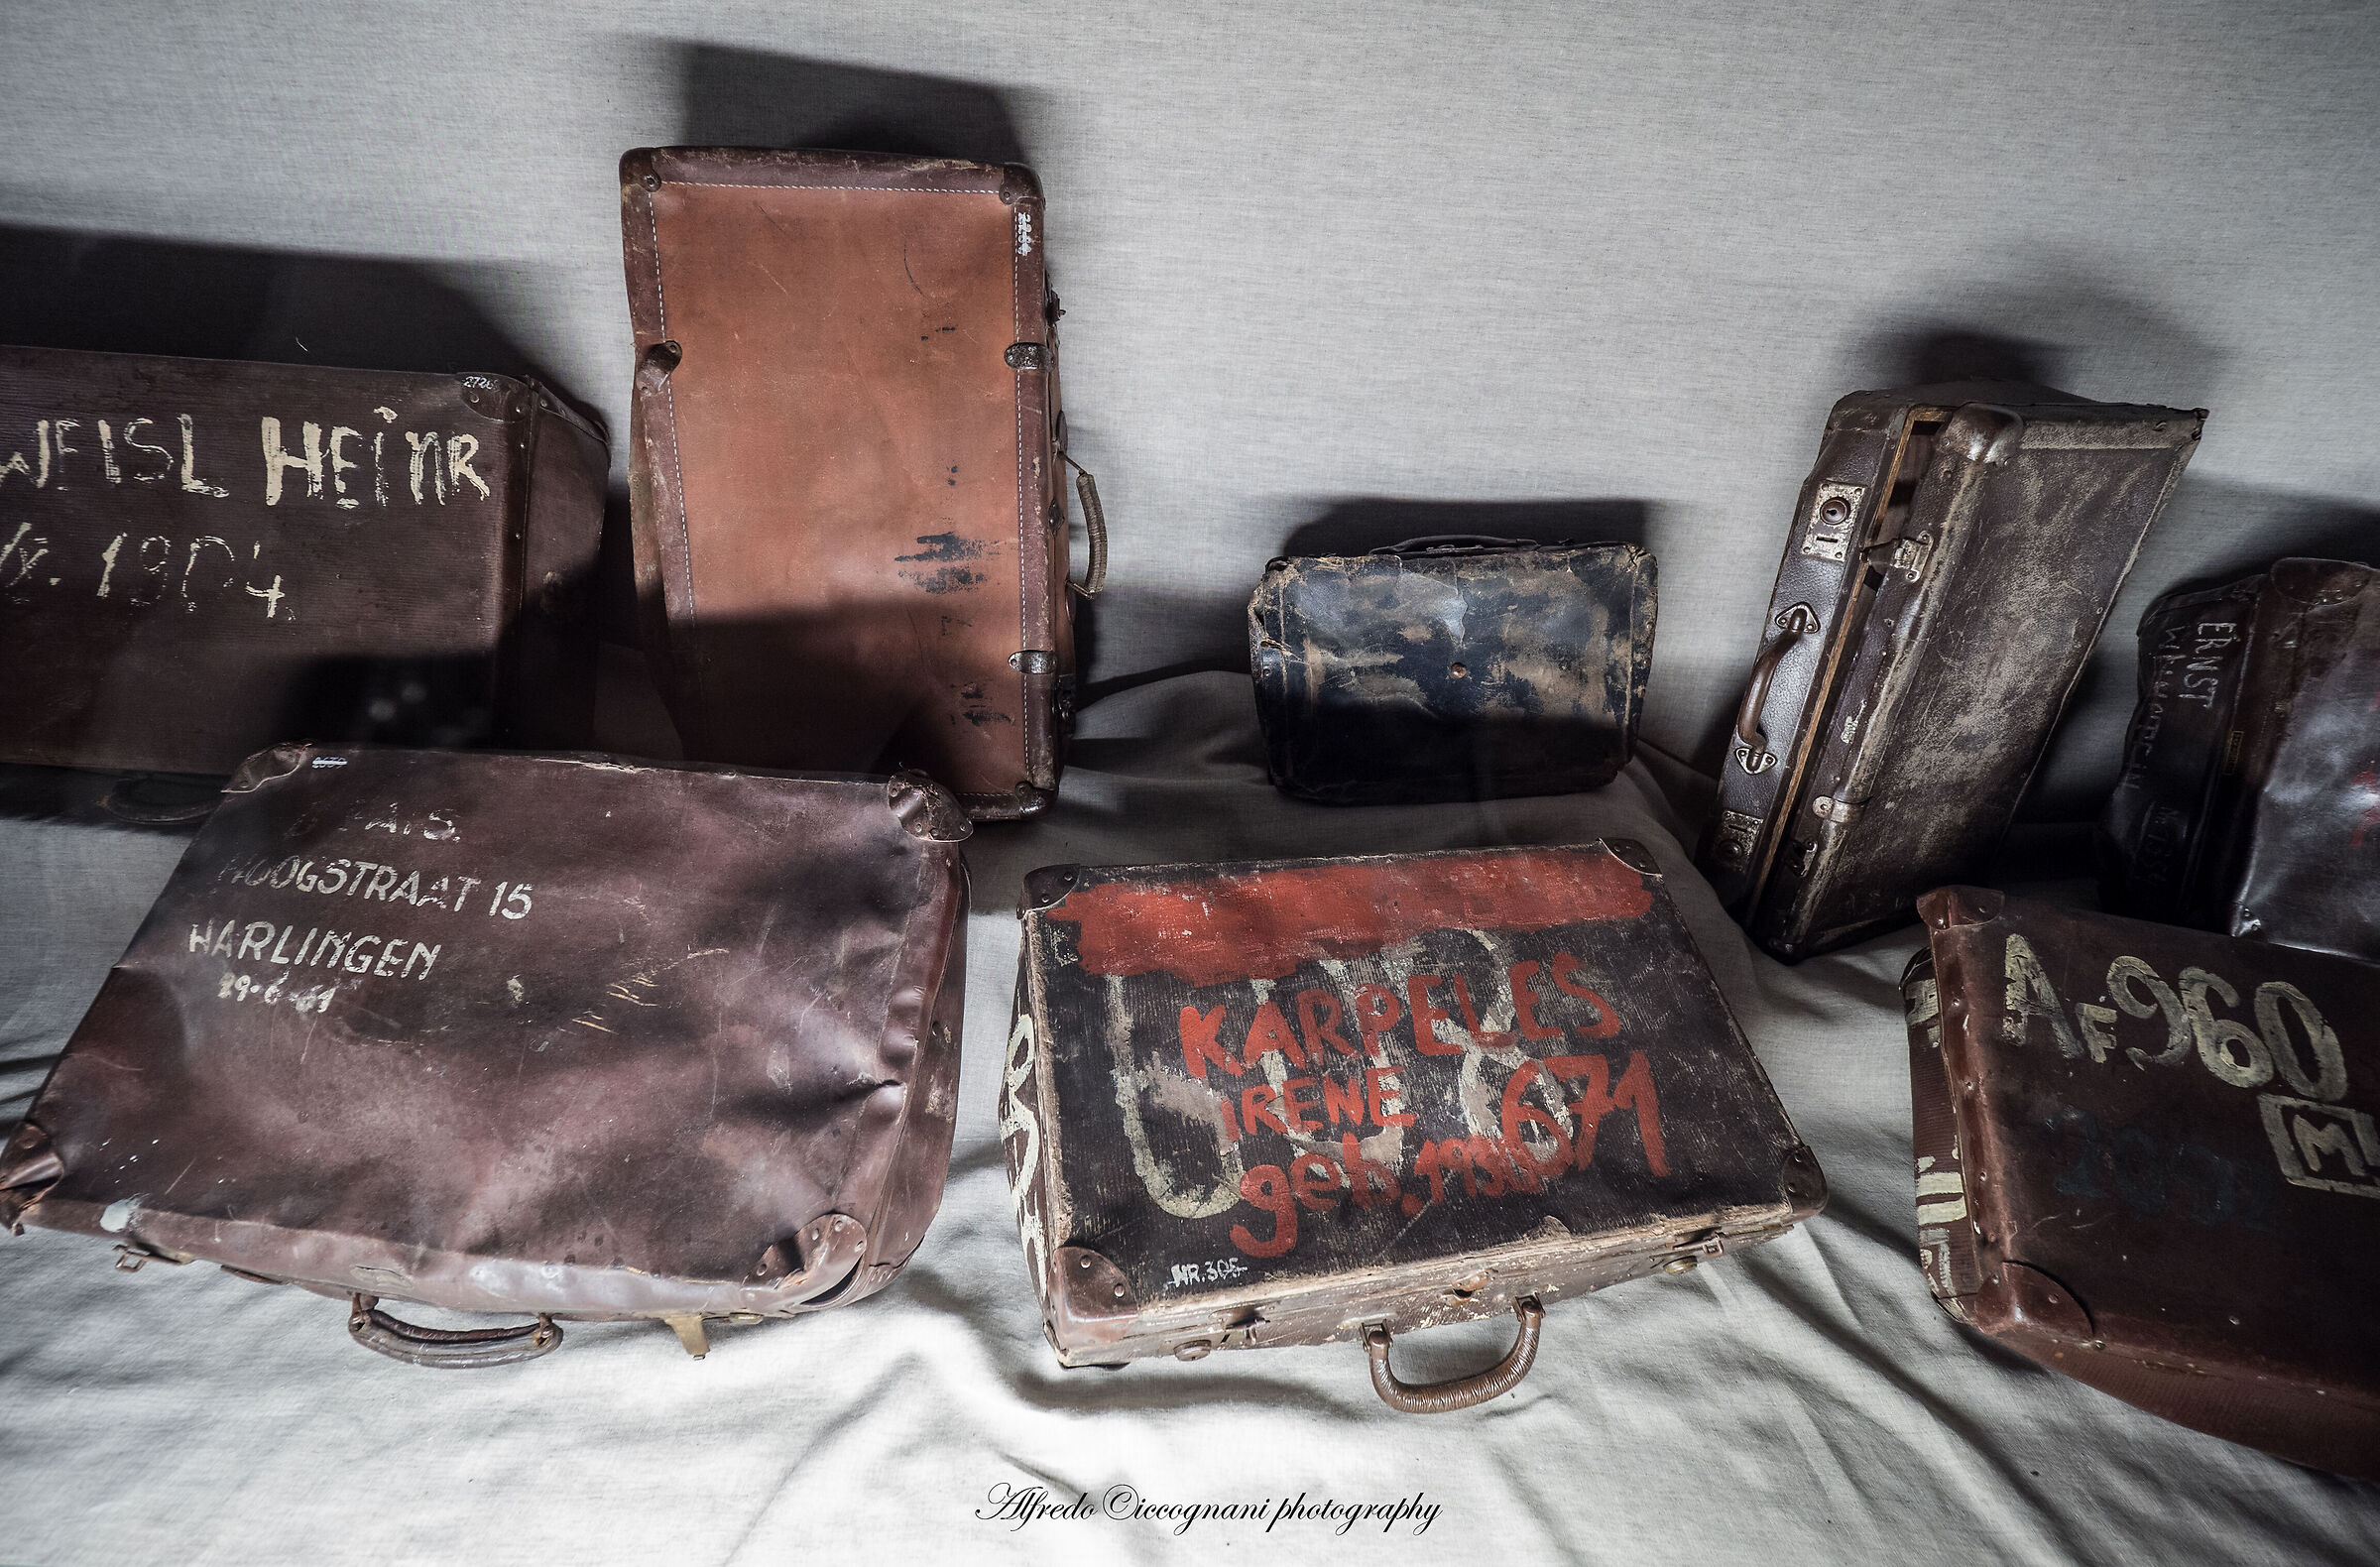 Some suitcases...